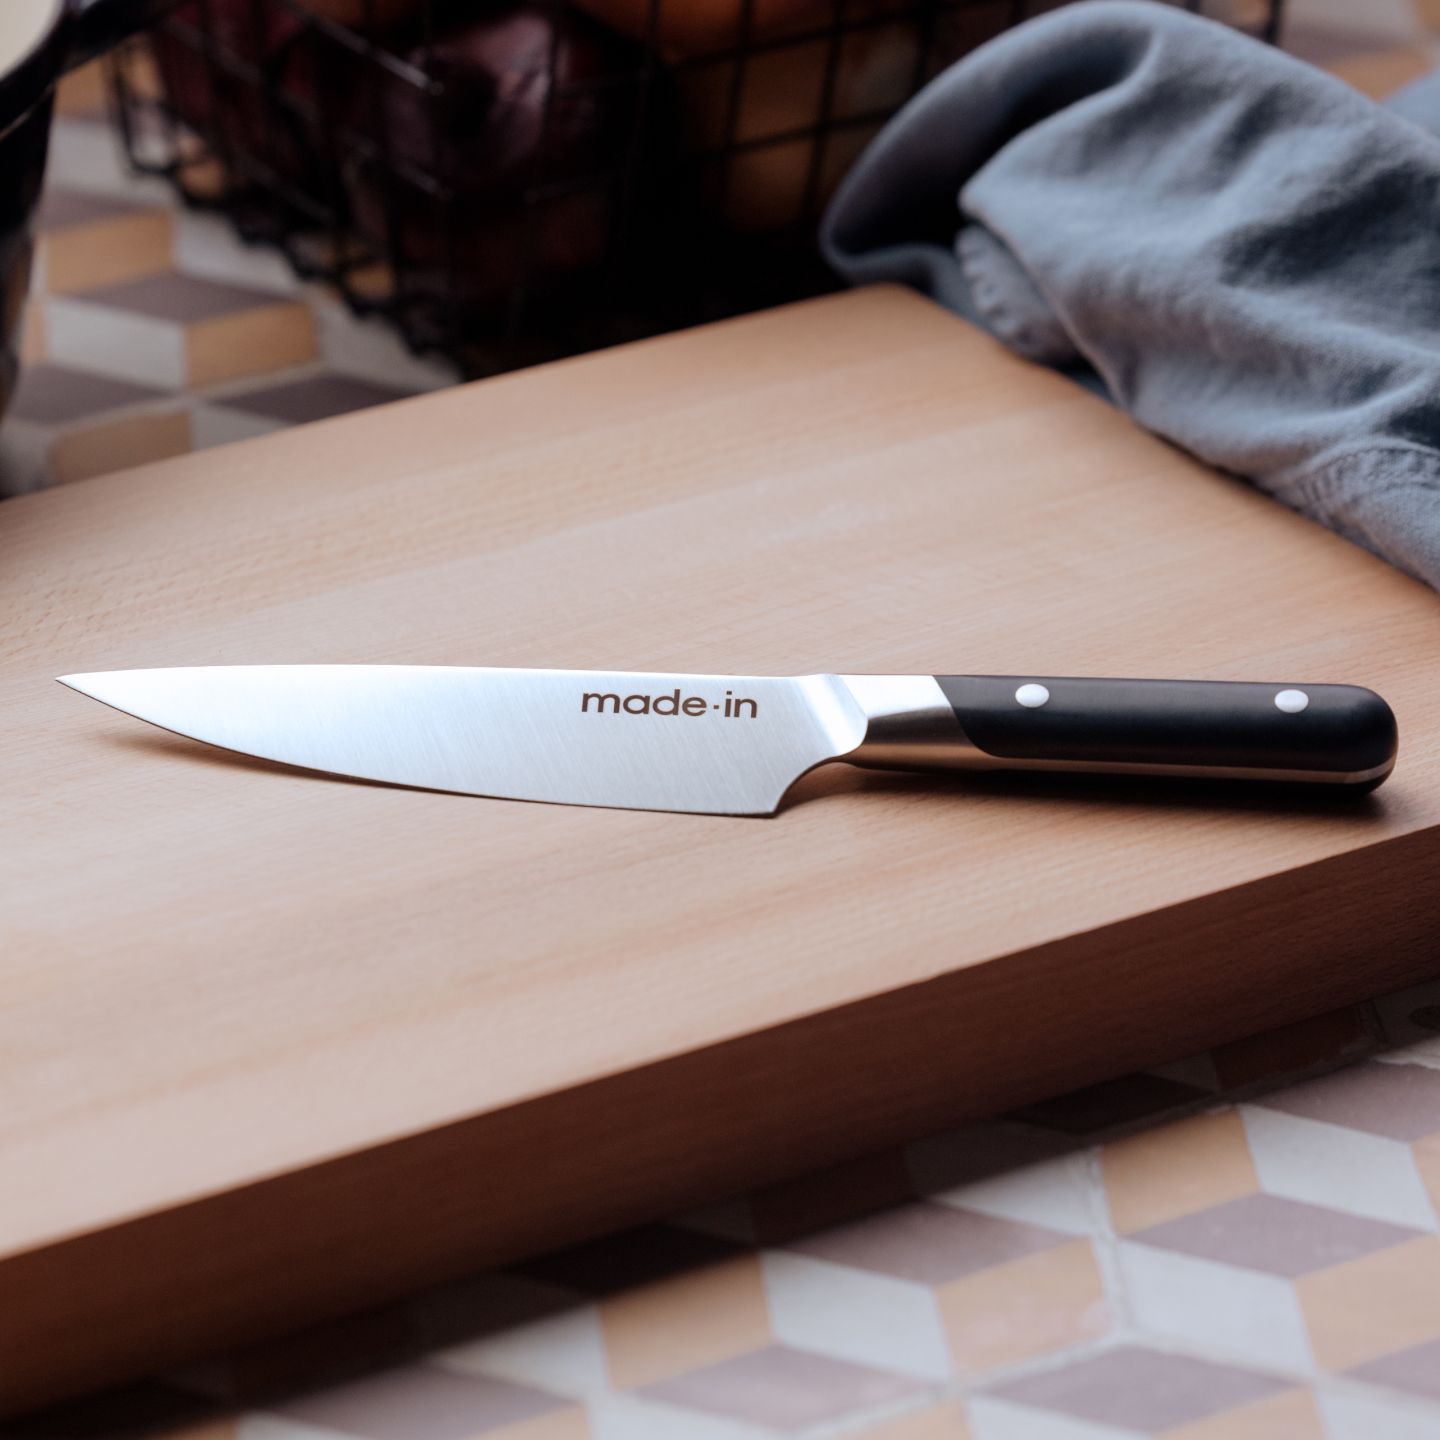 Limited Edition 6 Inch Chef Knife